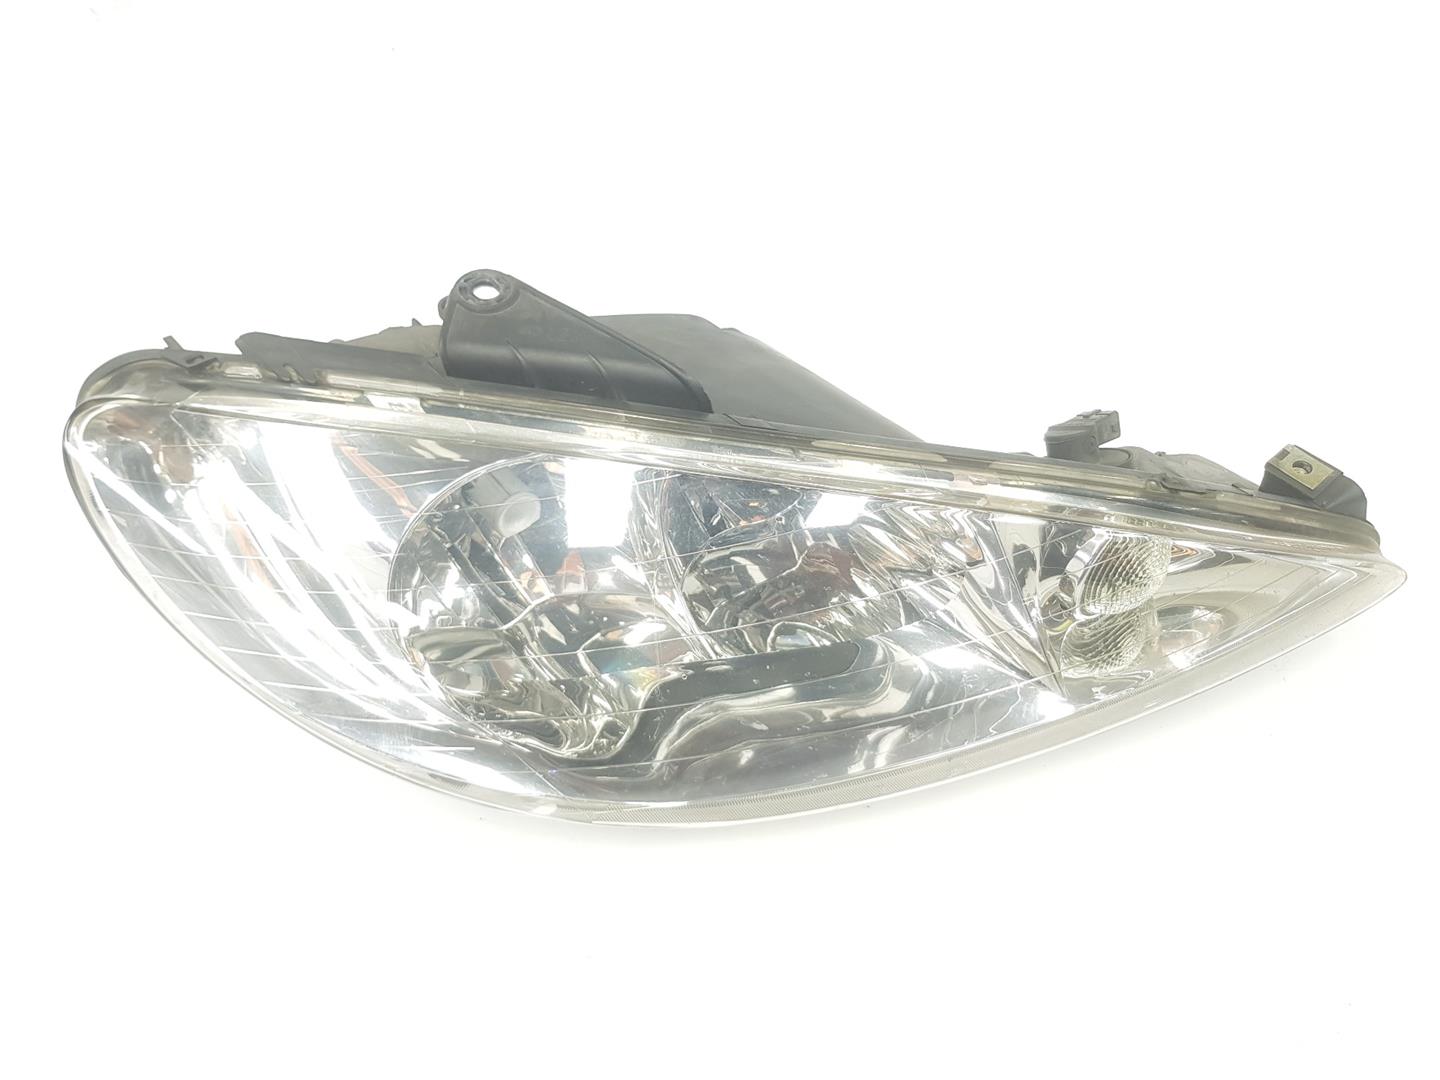 PEUGEOT 206 1 generation (1998-2009) Front Right Headlight 9628666780, 6205S9 24699889